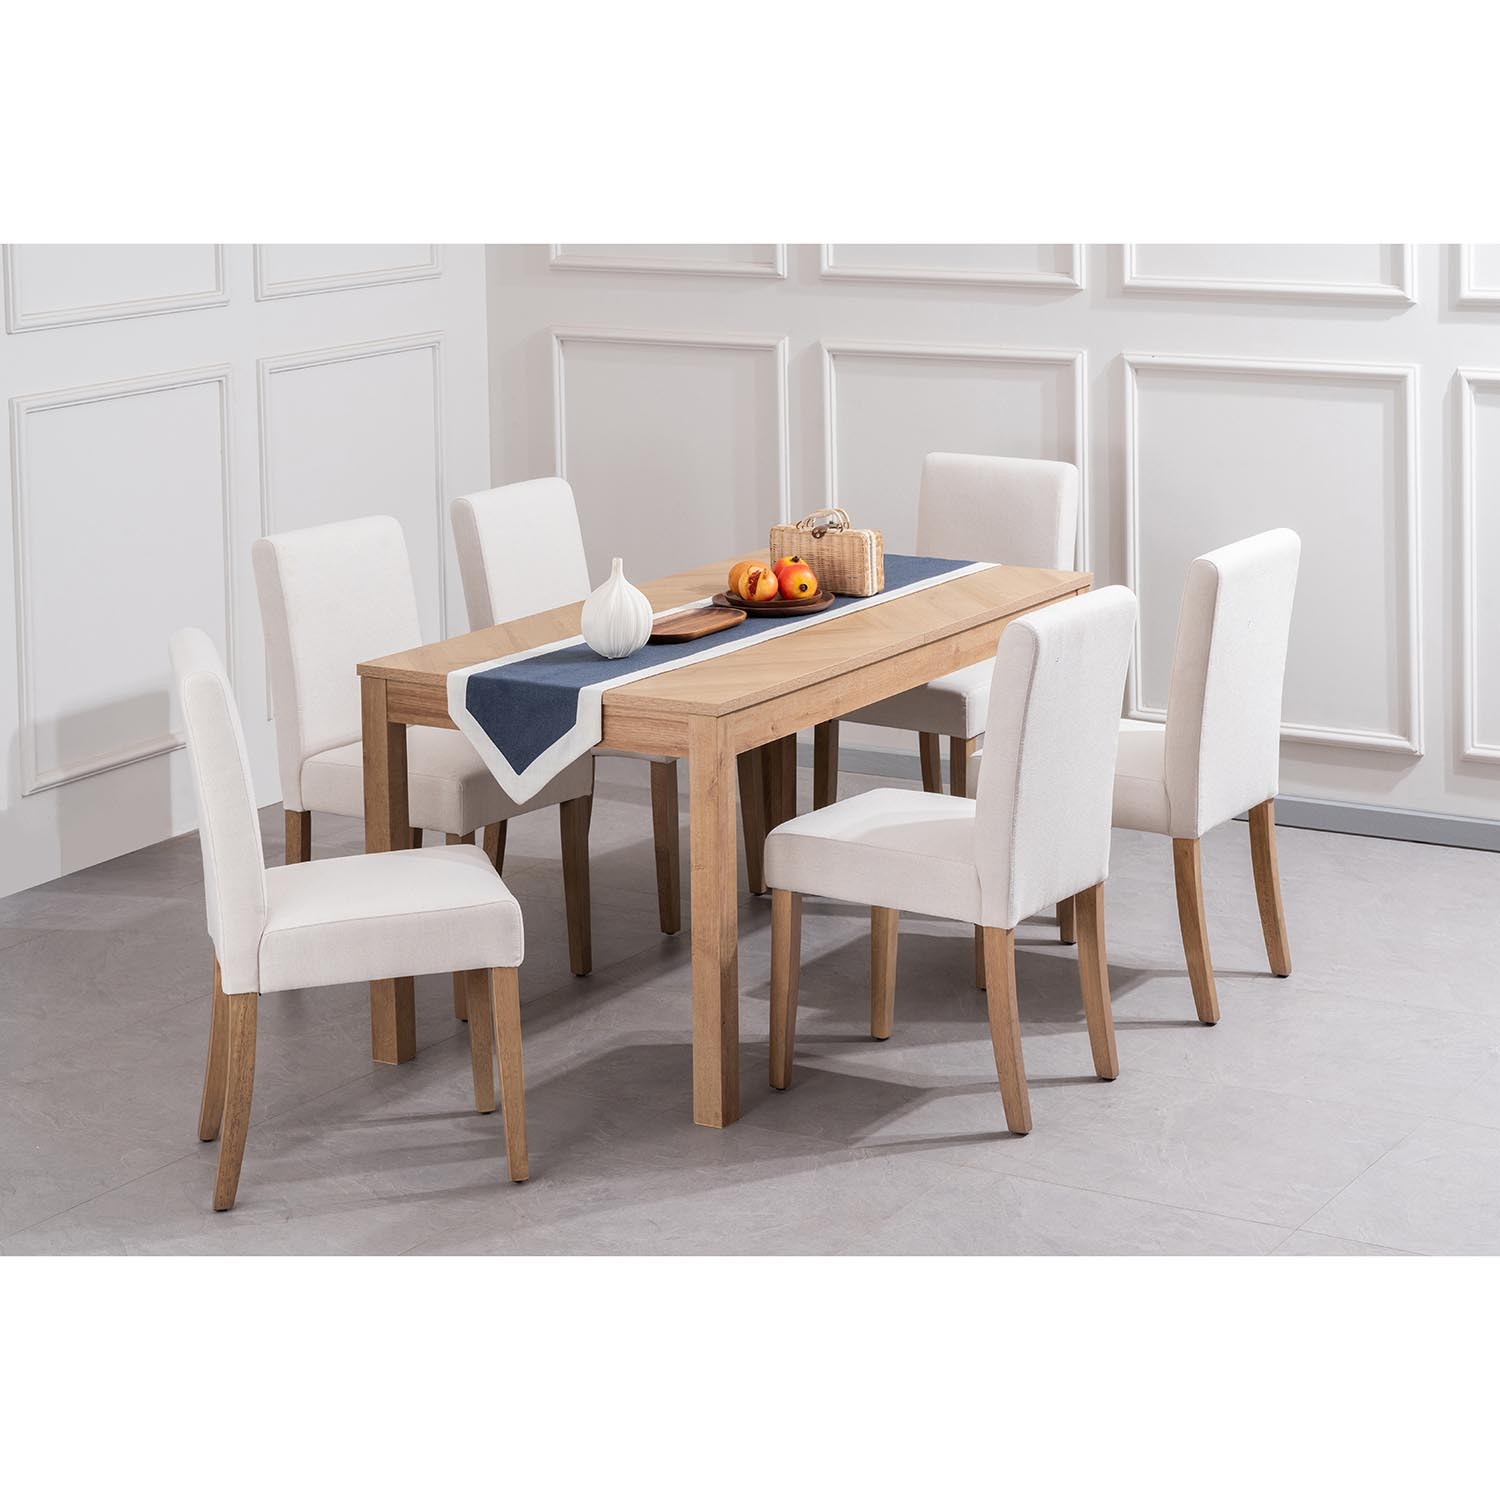 Oxford Parquet 6 Seater 150 to 190cm Extending Dining Table Oak Image 10